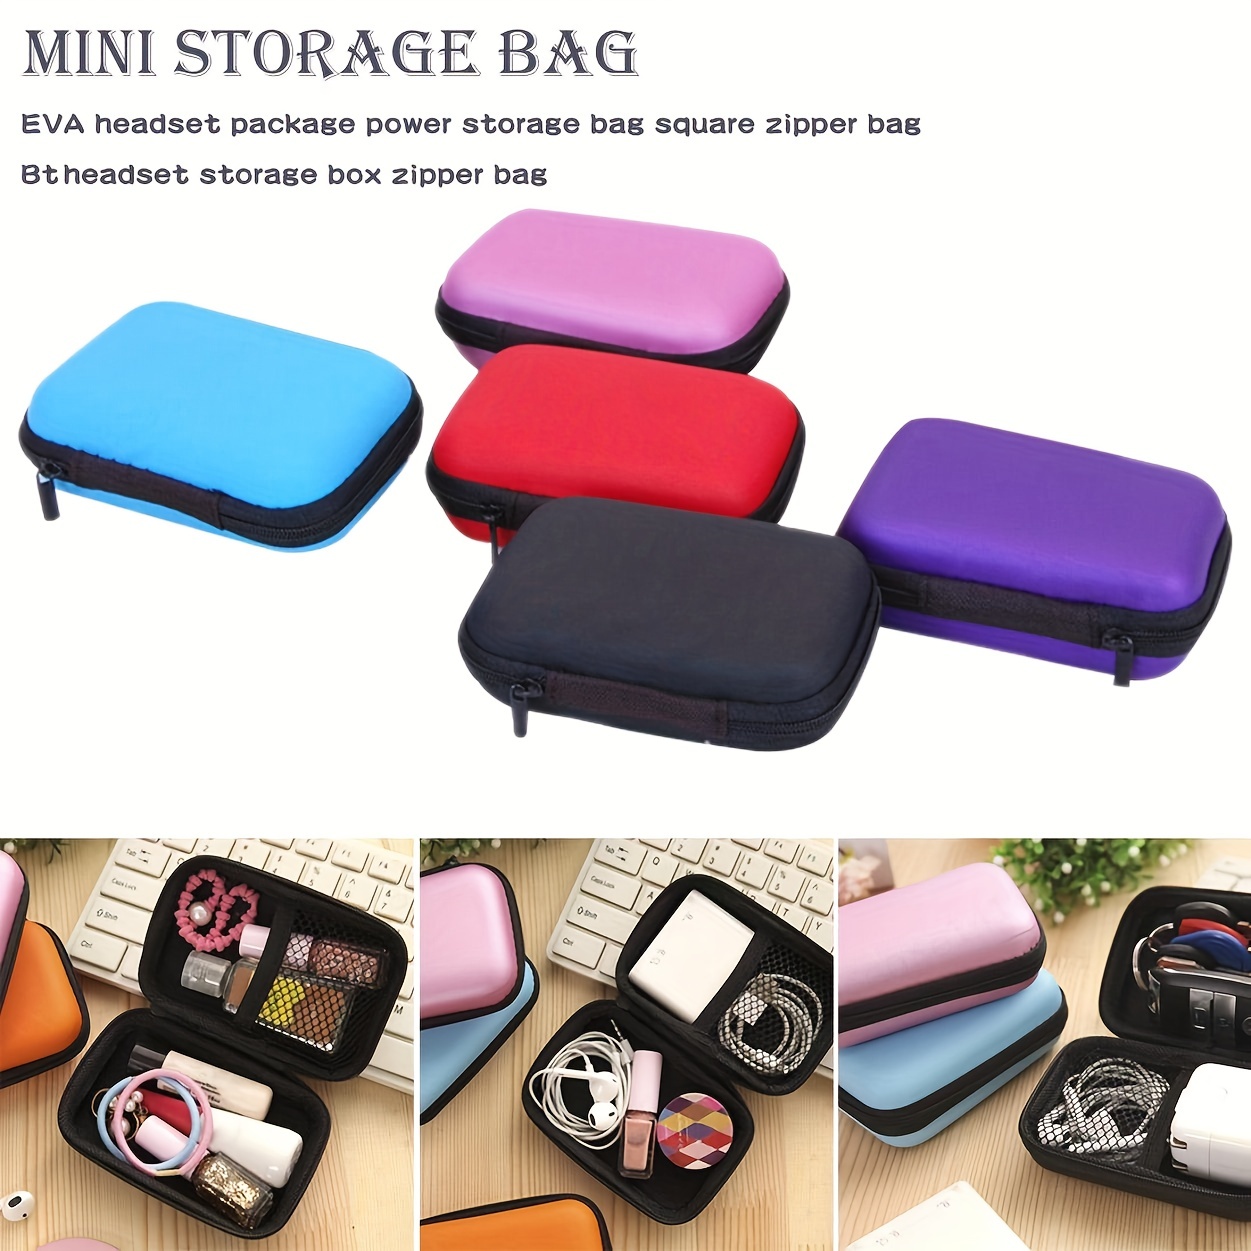 1pc Black Eva Mini Digital Accessories Storage Bag With Wrist Strap,  Compatible With Usb, Wireless Earphones, Data Cables For Organization